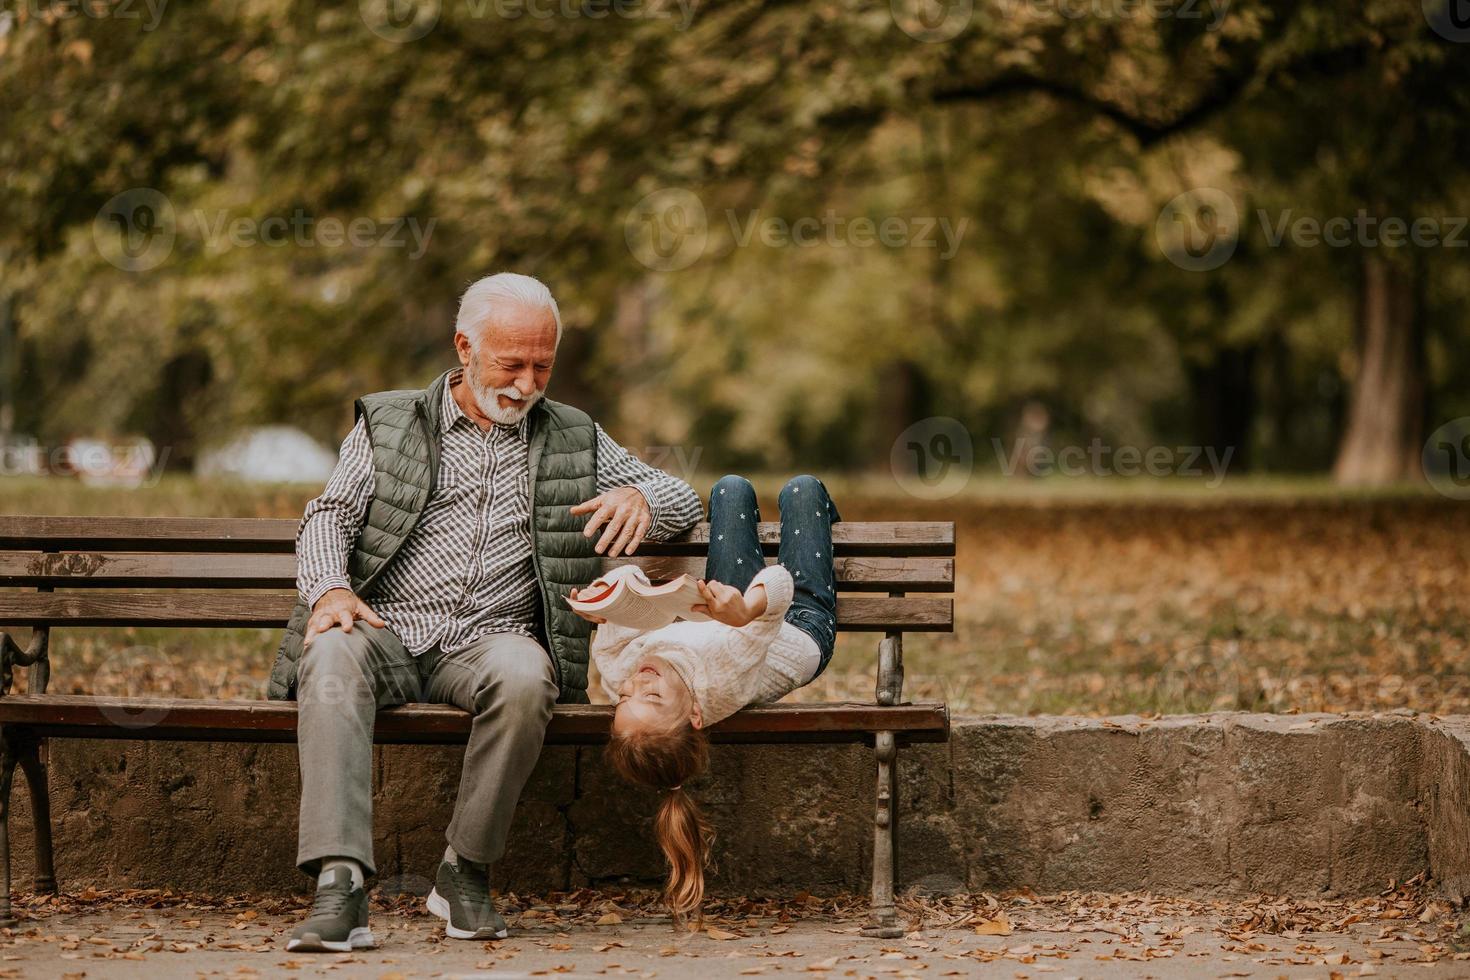 Grandfather spending time with his granddaughter on bench in park on autumn day photo